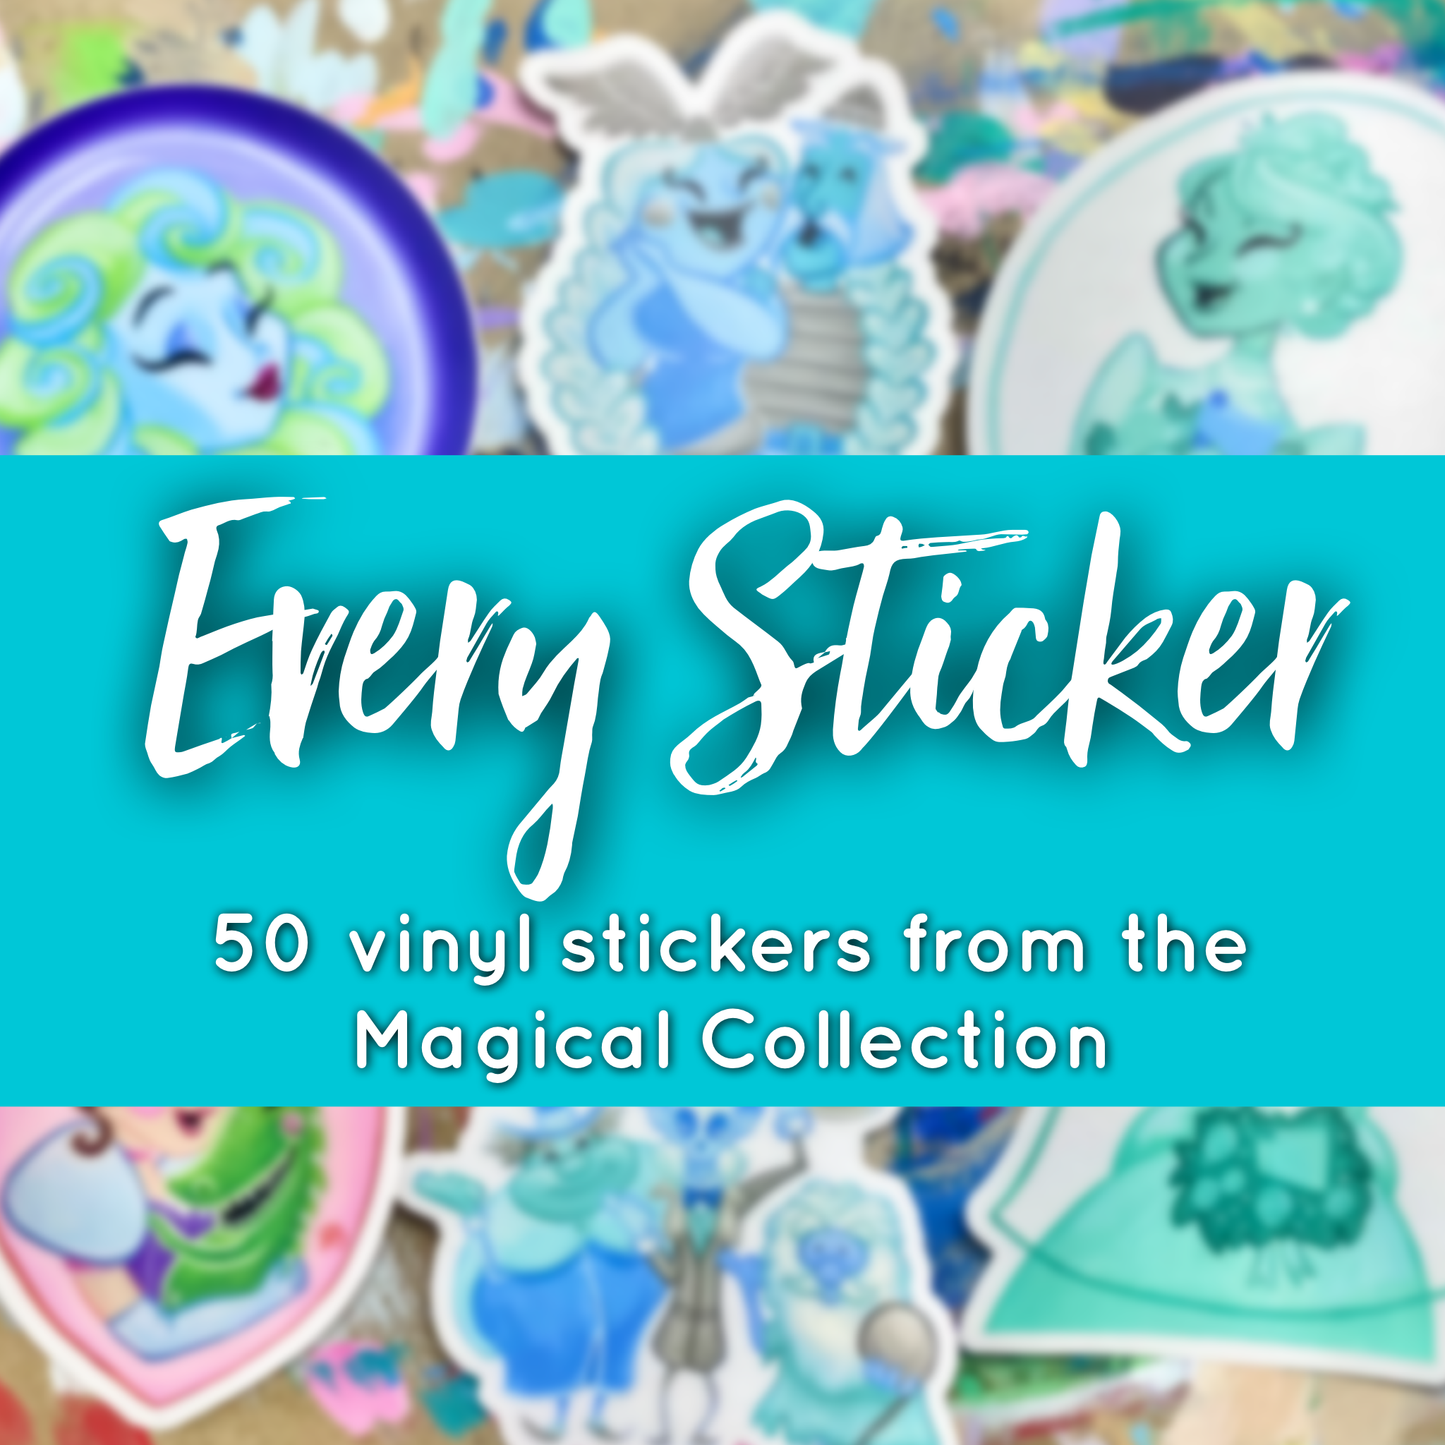 Every Sticker - Magical Collection